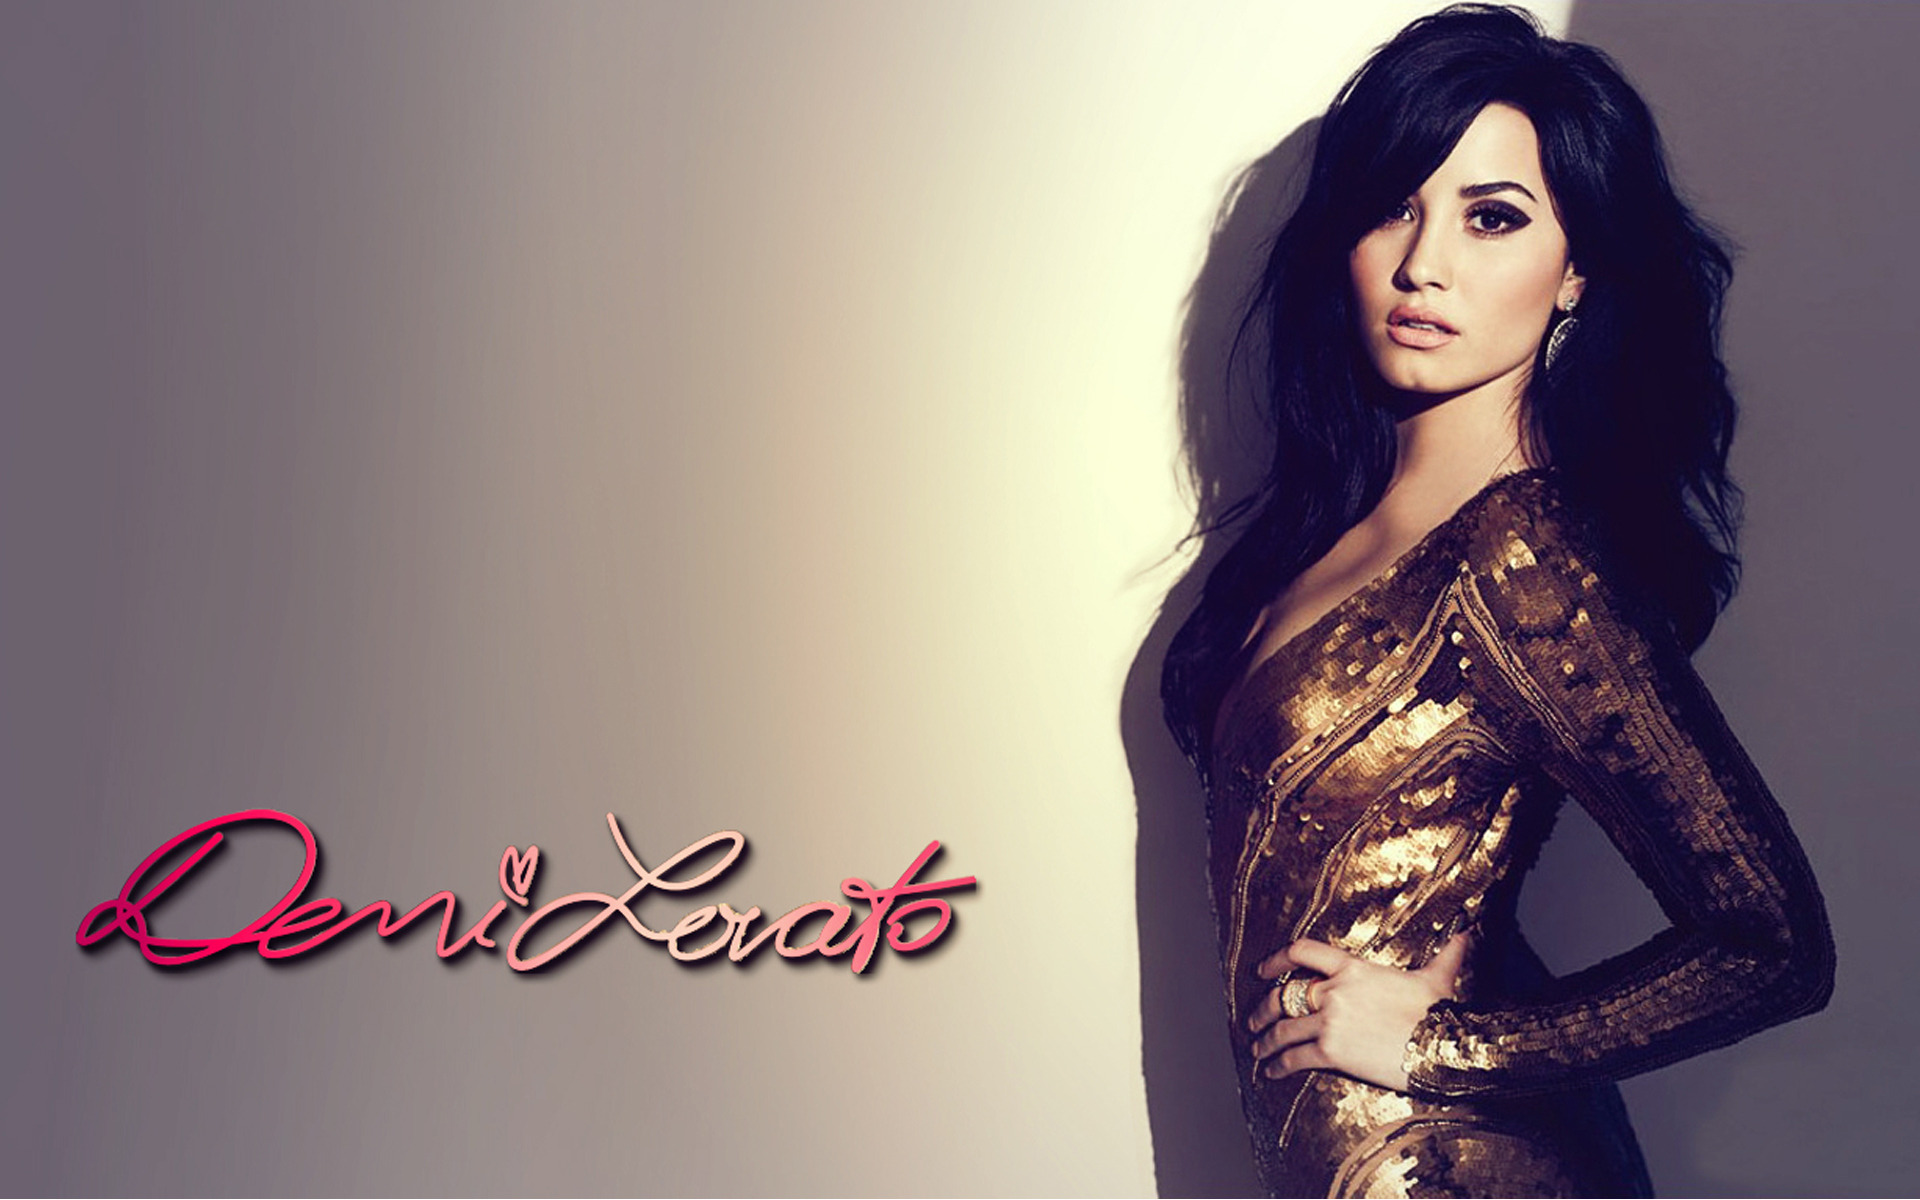 Demi Lovato Background Wallpaper High Definition Quality